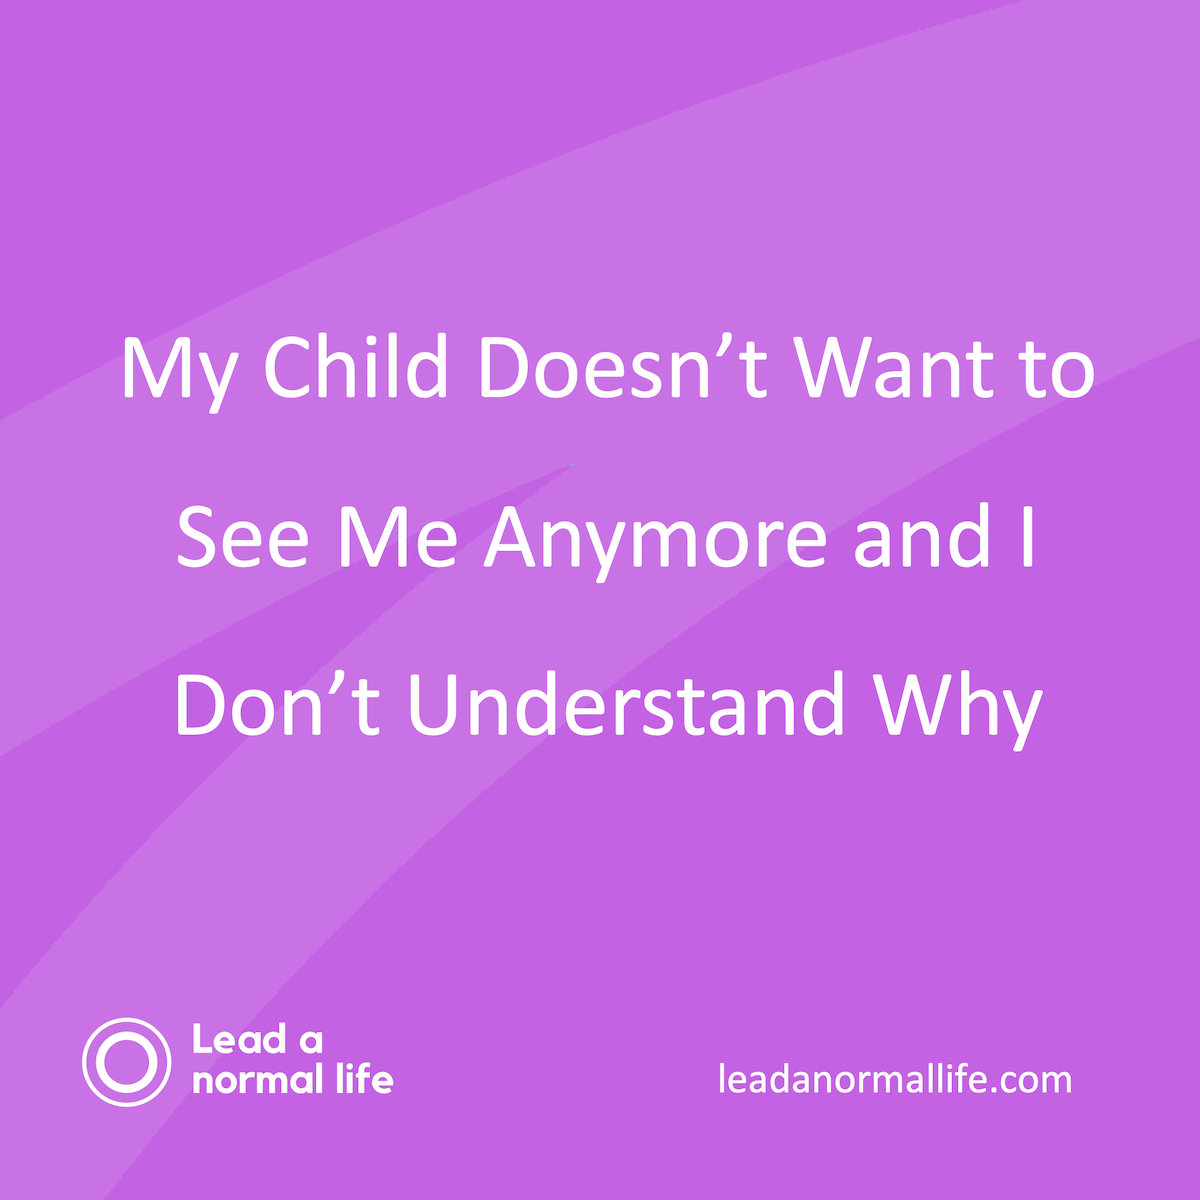 My Child Doesn't Want to See Me Anymore and I Don't Understand Why | Lead a Normal Life